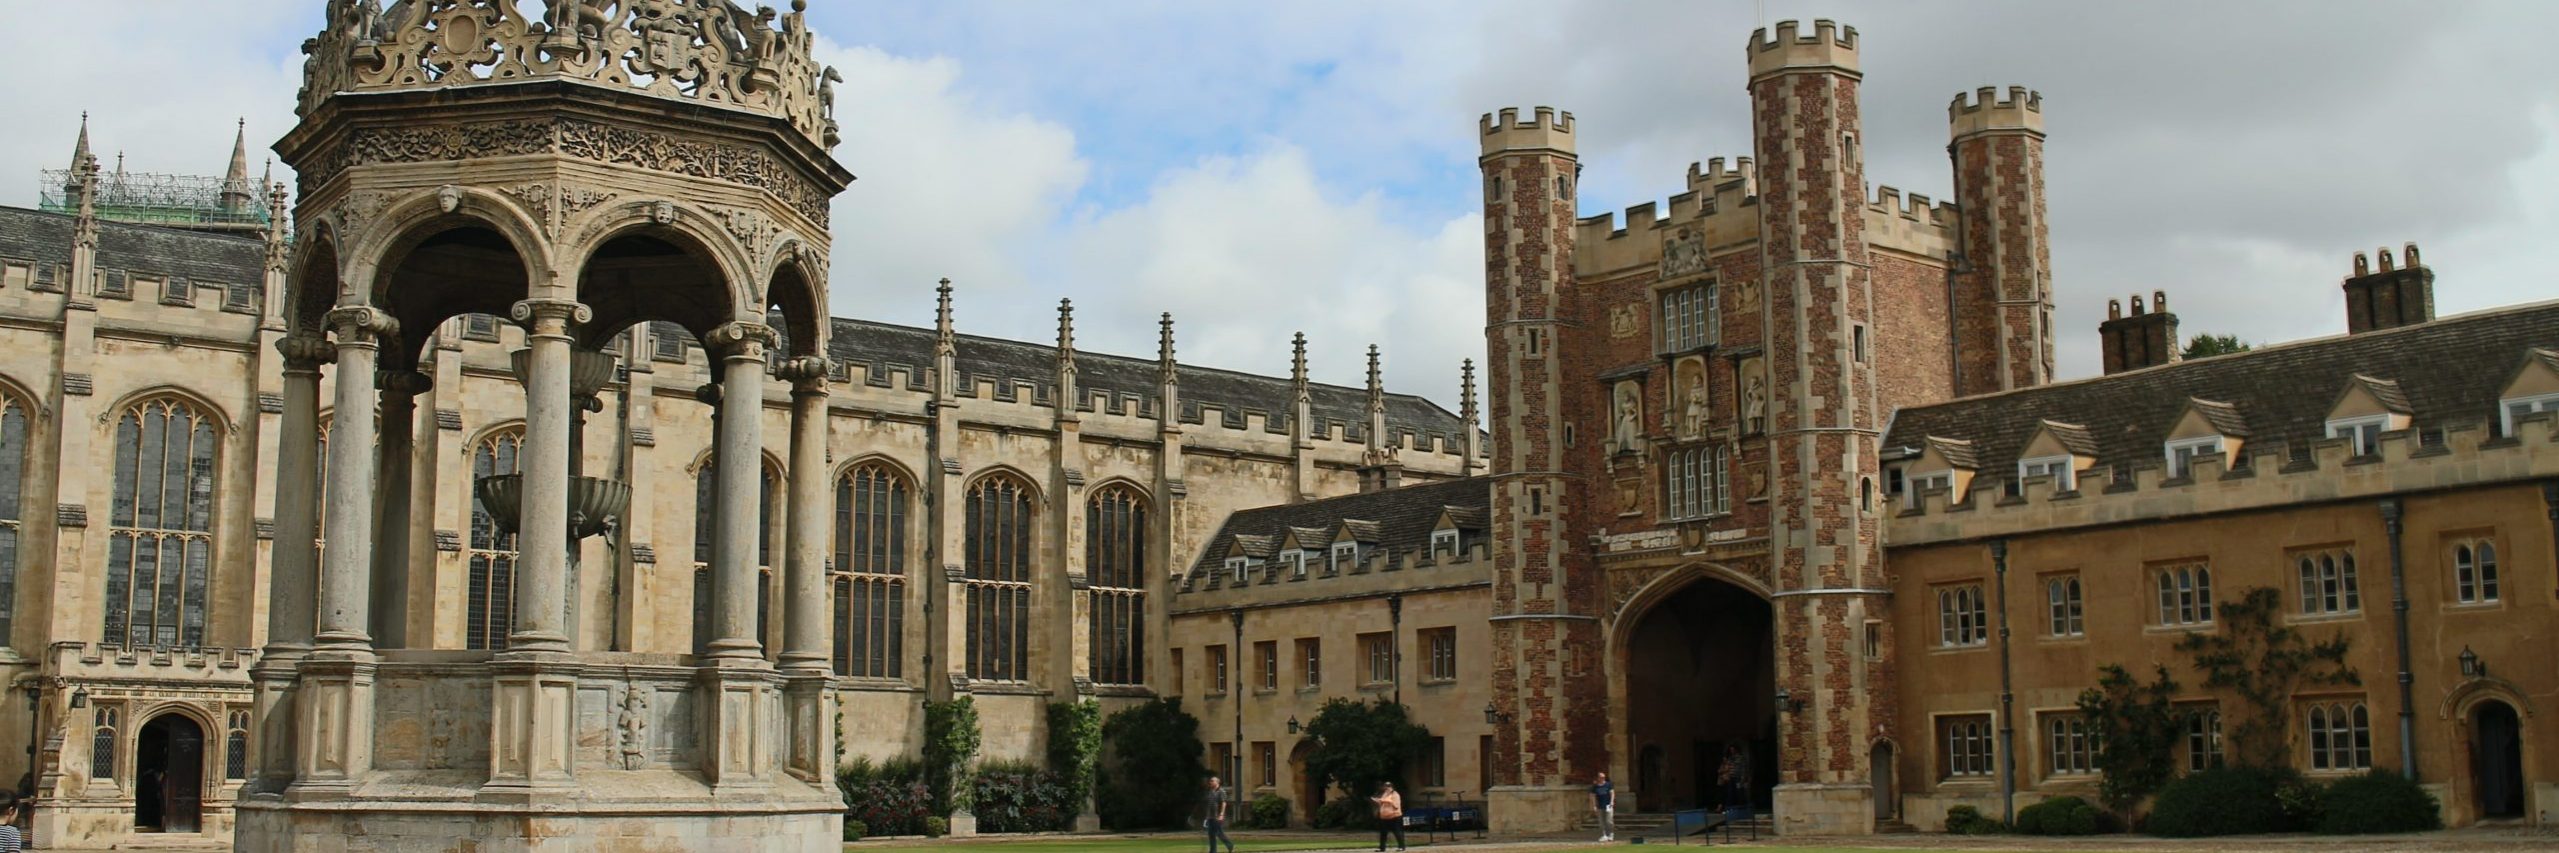 The grounds of Trinity College, Cambridge University, where the spears were stored in the museum. Image source: Suicasmo, via Wikimedia Commons